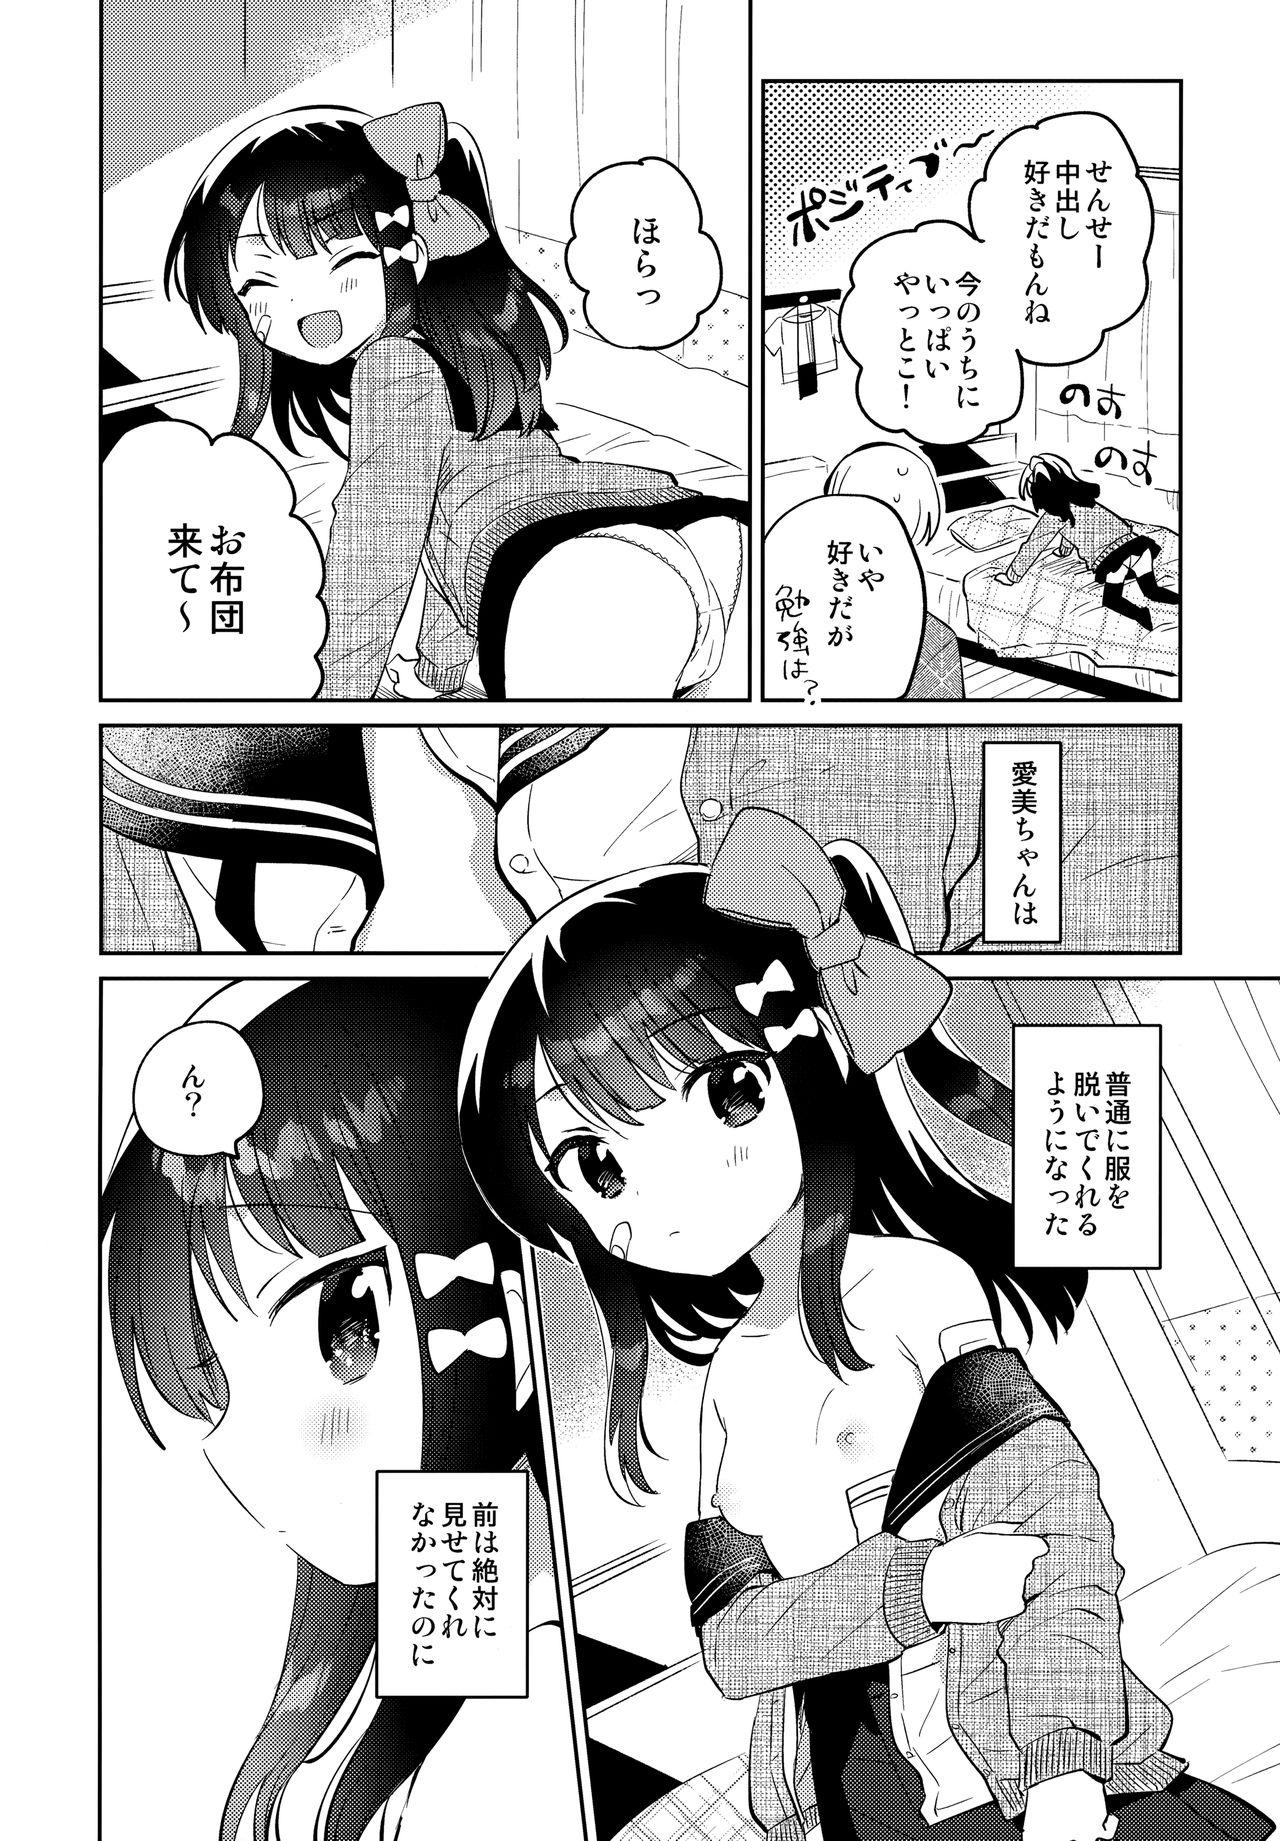 Putaria Anoko wa Bad Girl 2 - That child is a Problem child.second - Original Off - Page 7